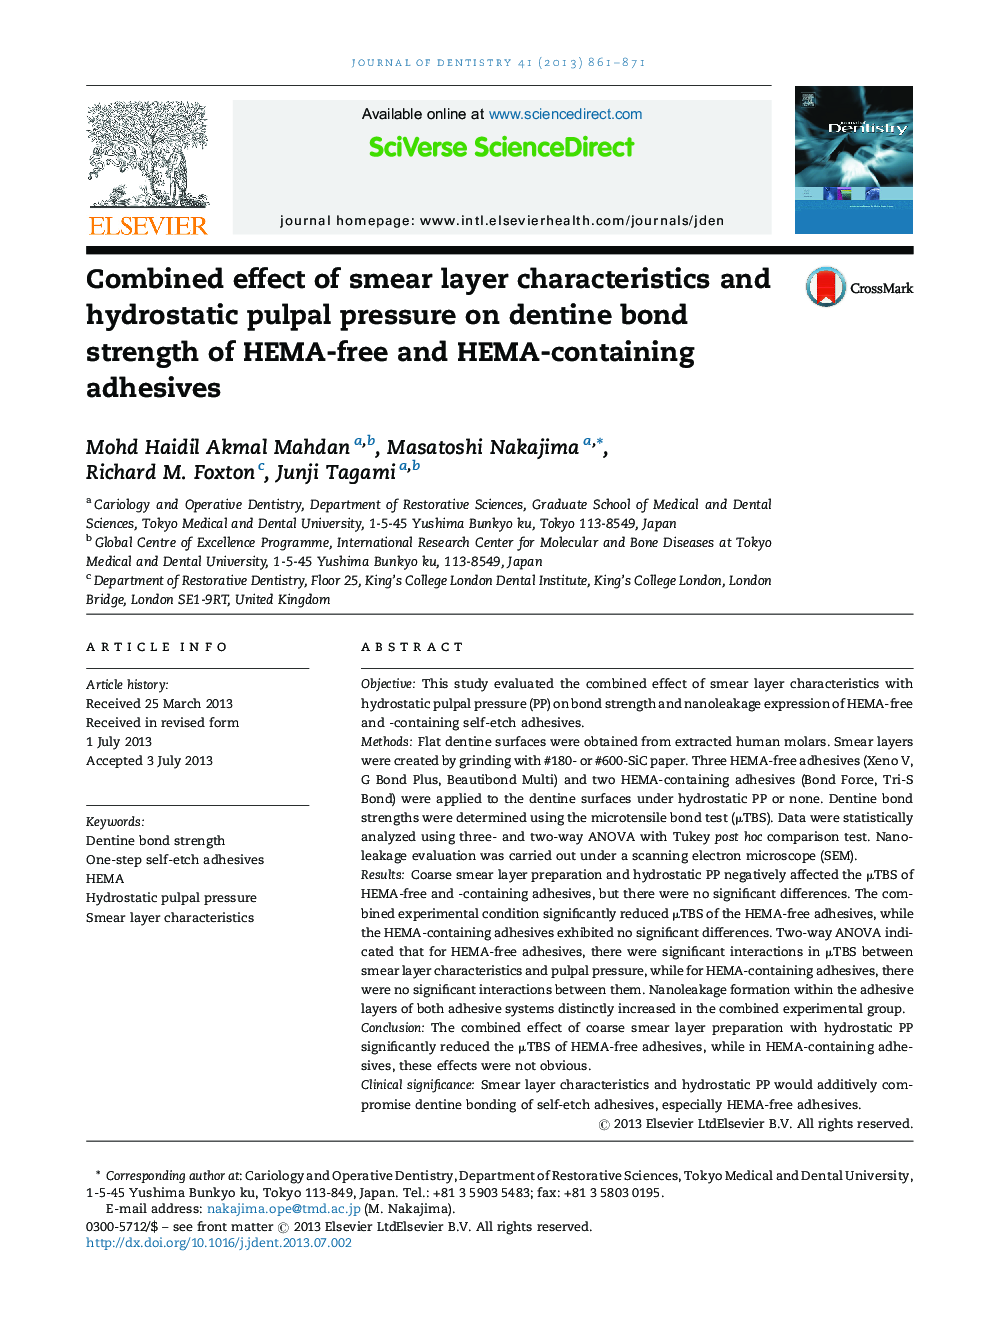 Combined effect of smear layer characteristics and hydrostatic pulpal pressure on dentine bond strength of HEMA-free and HEMA-containing adhesives